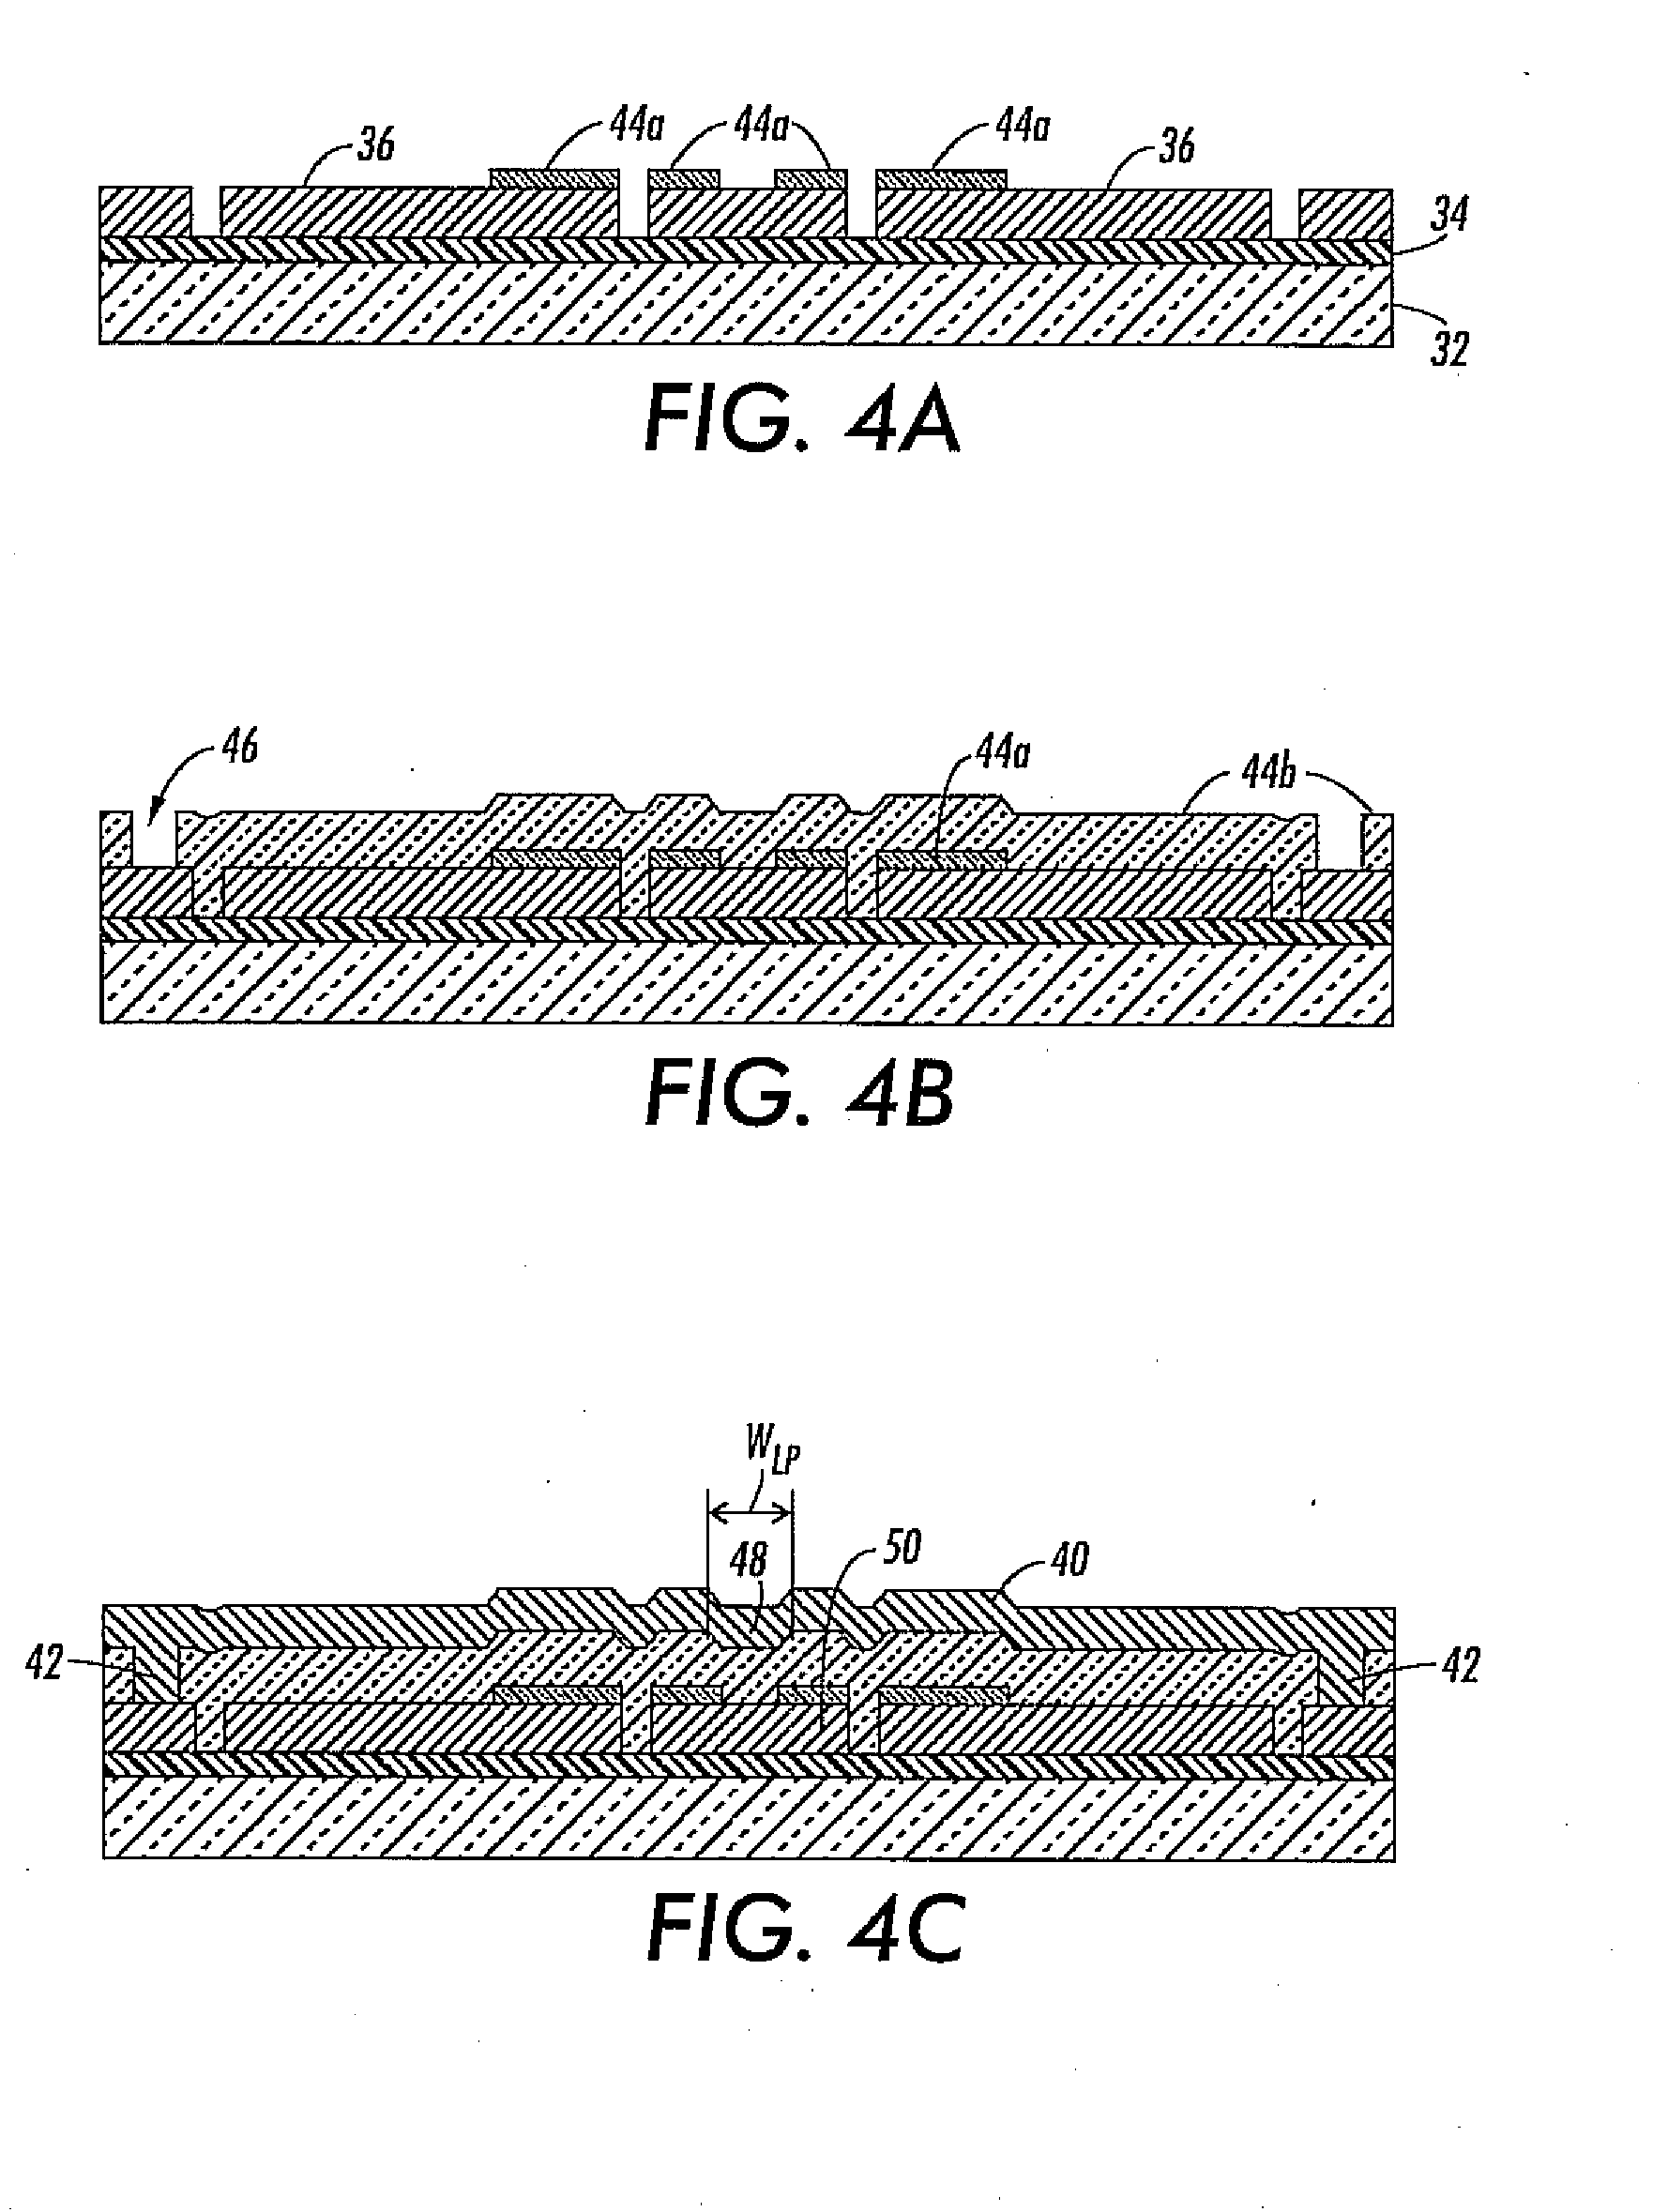 Electrostatic actuator device and method of making the device